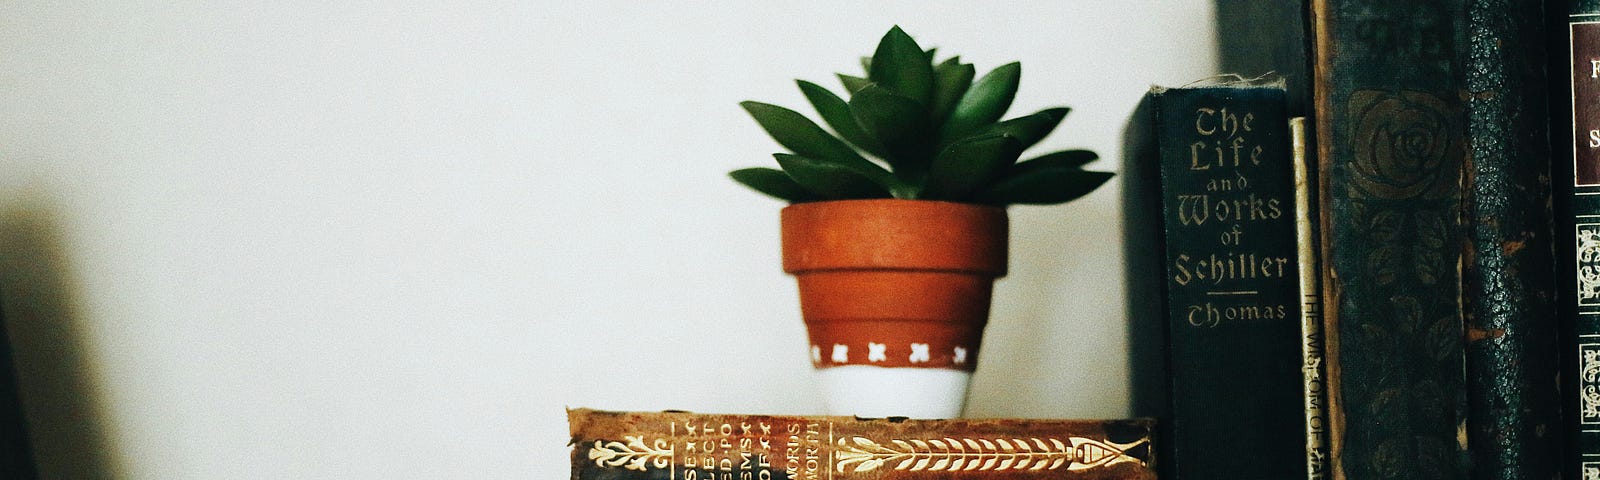 Books stacked on a shelf with a small potted plant.